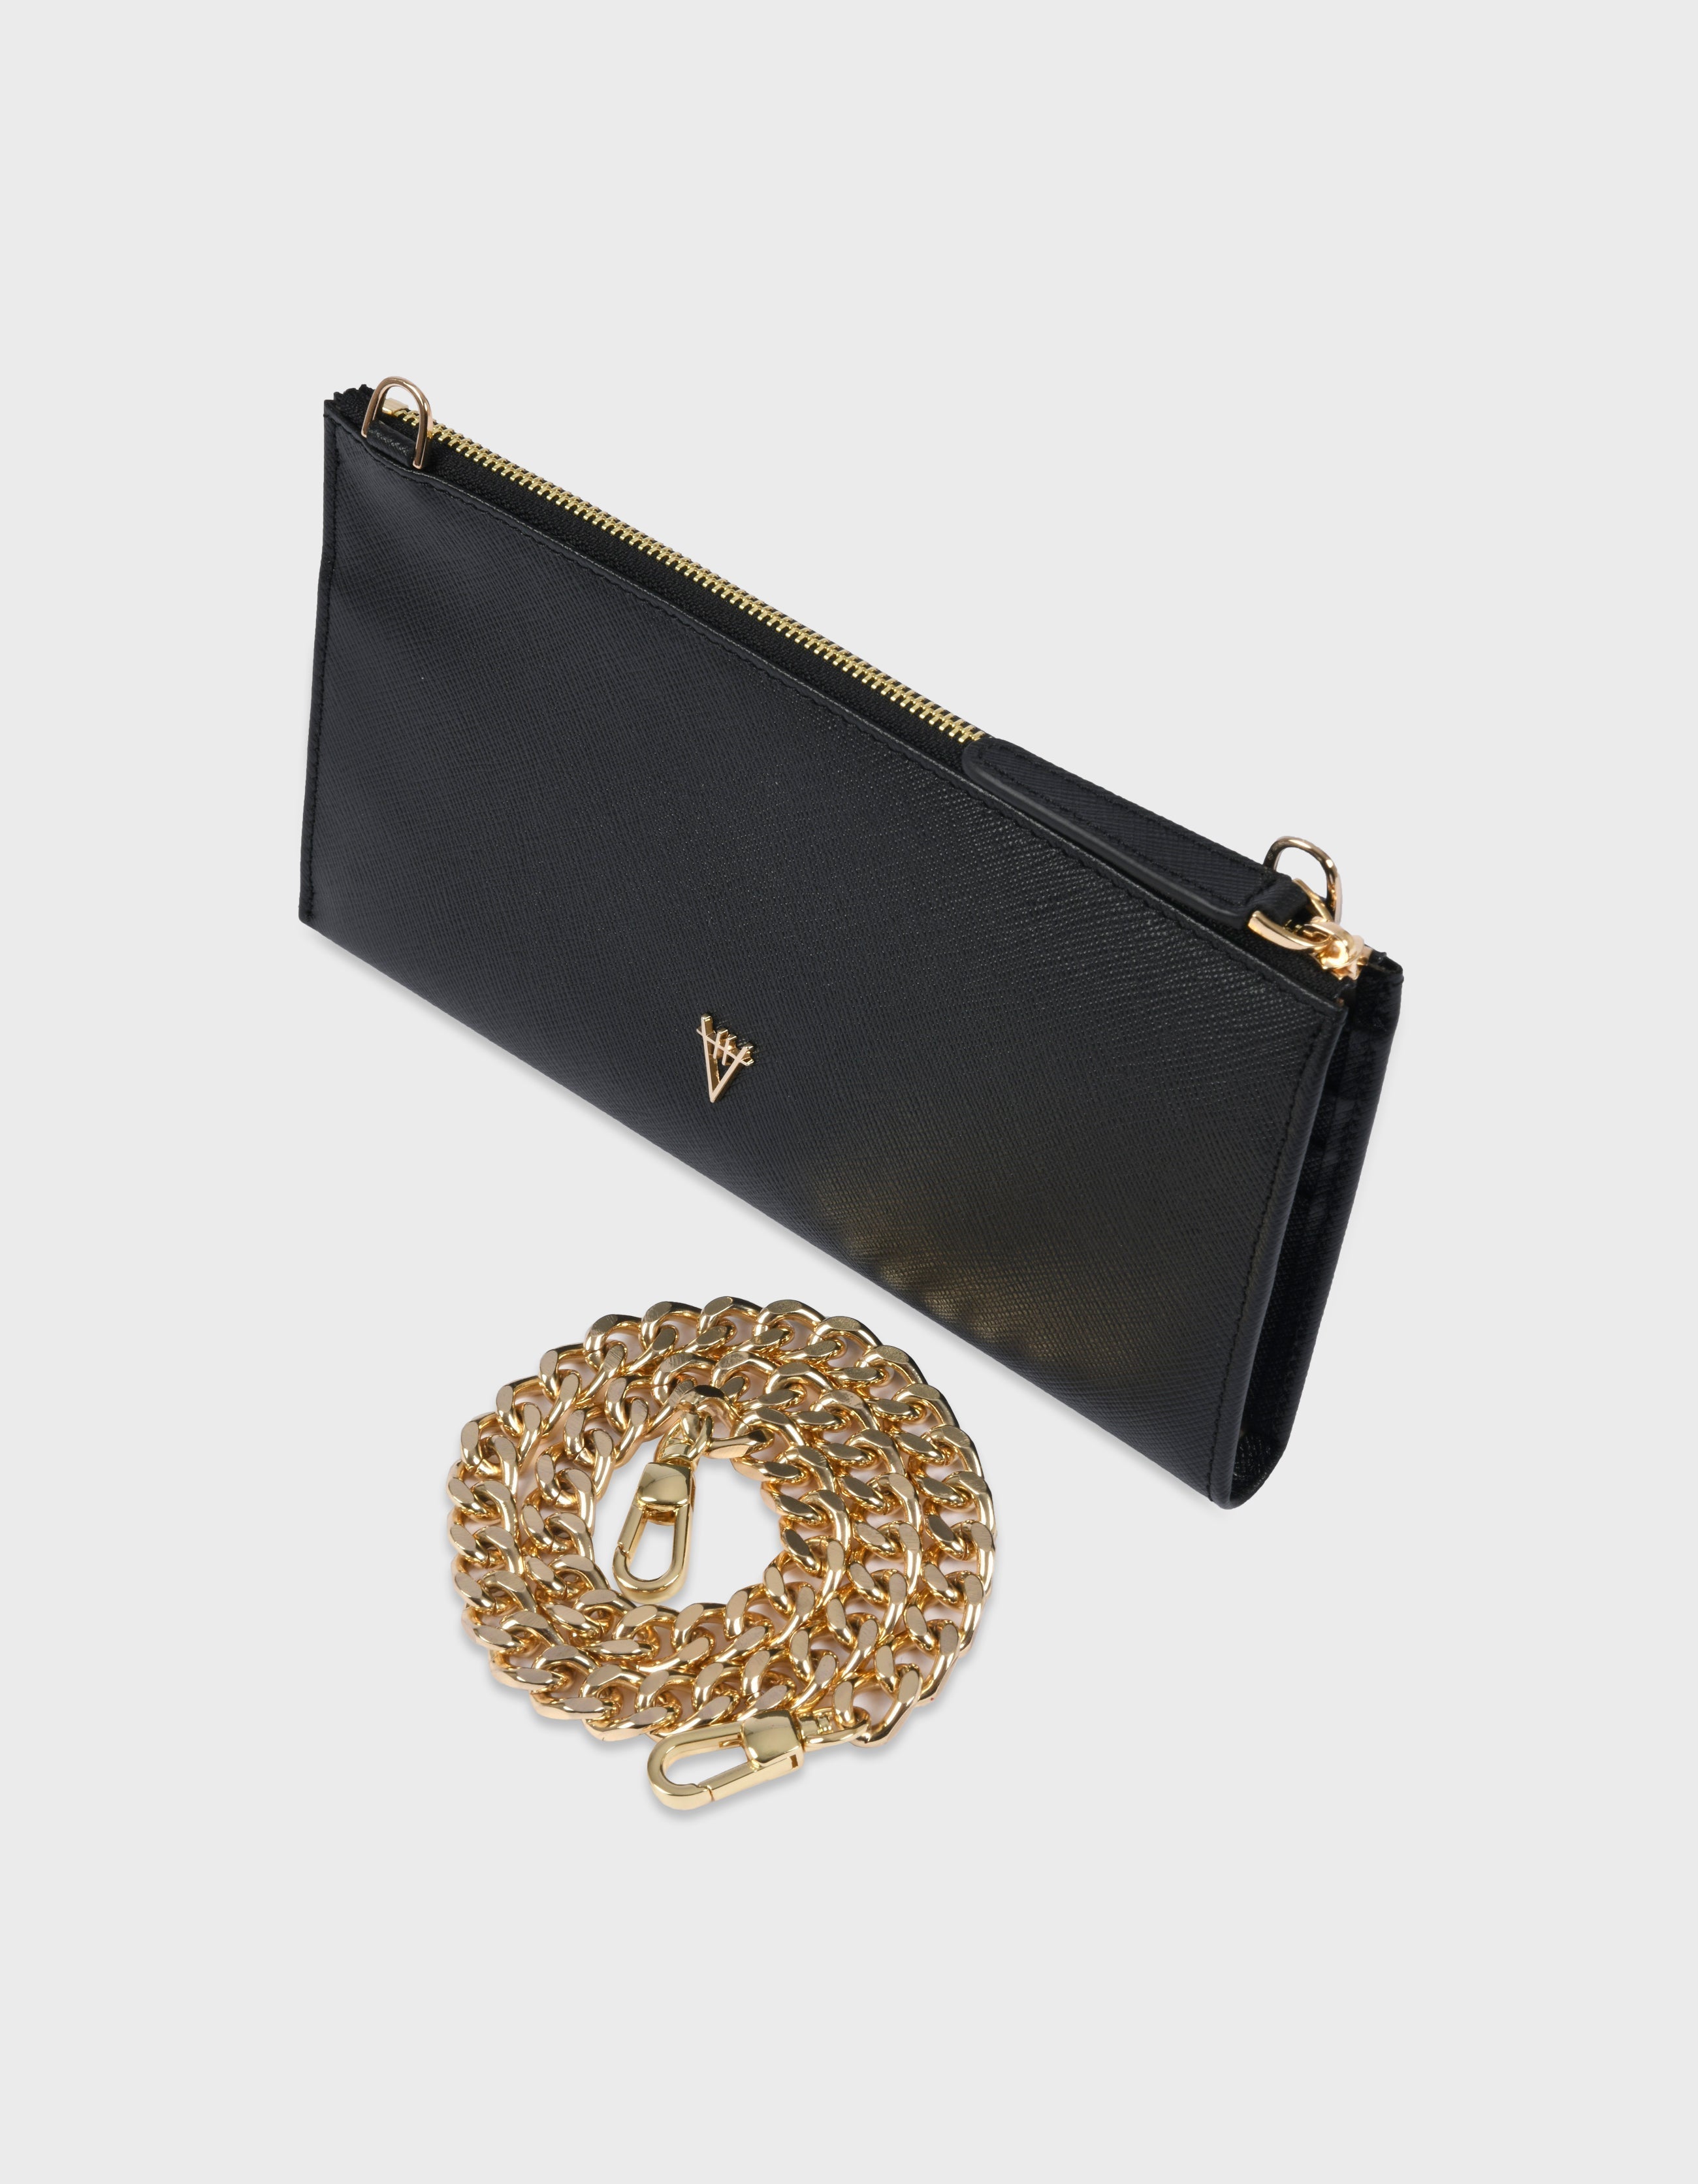 Omnia Chain Bag & Clutch - Finest Quality HiVa Atelier GmbH Leather Accessories